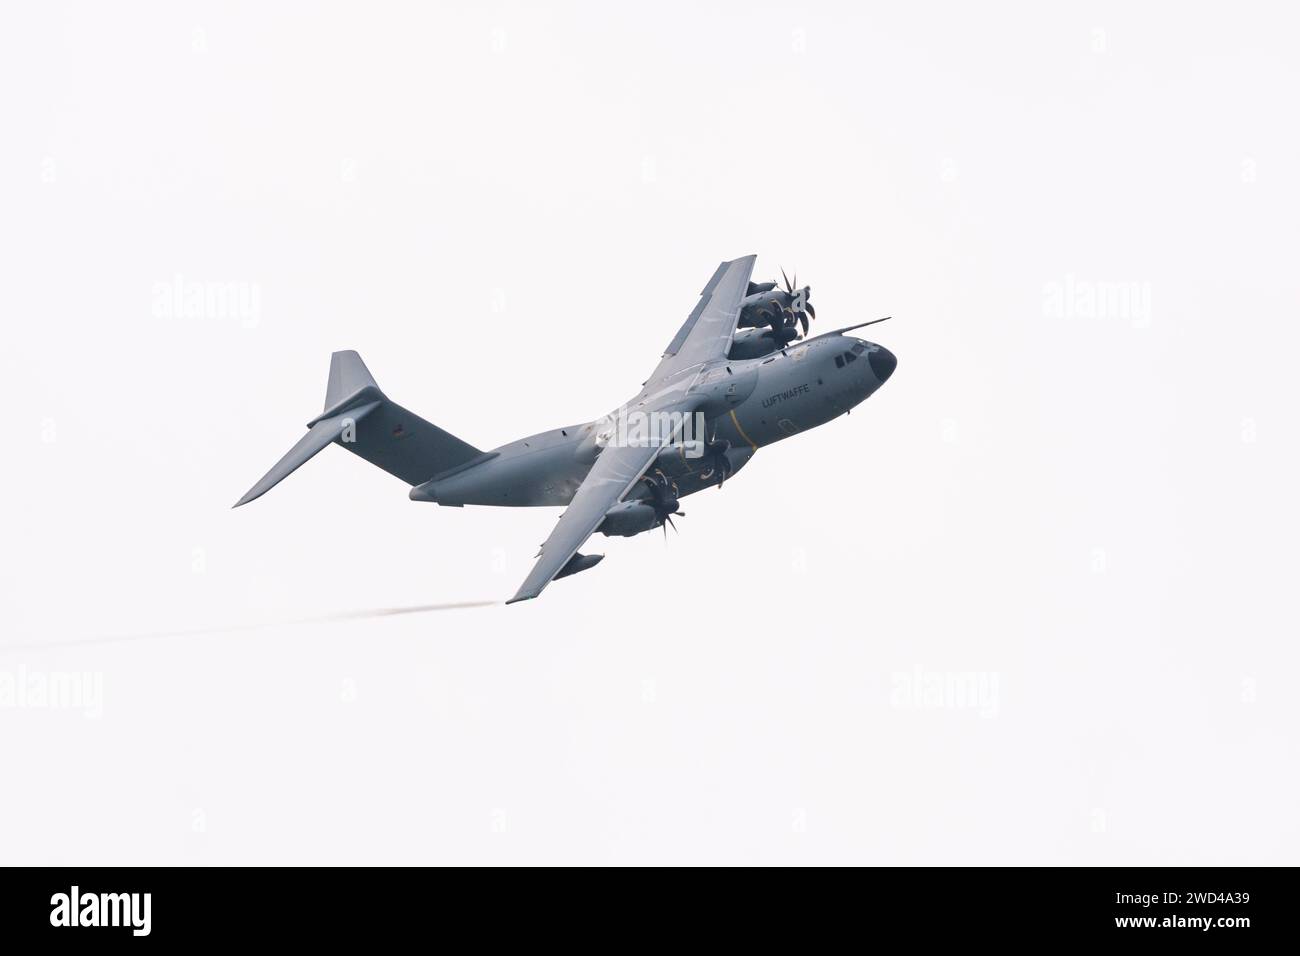 Luftwaffe A400M-180 Atlas airbus (Number 54 28) European four-engine turboprop military transport aircraft. Taking off and flying fast Stock Photo